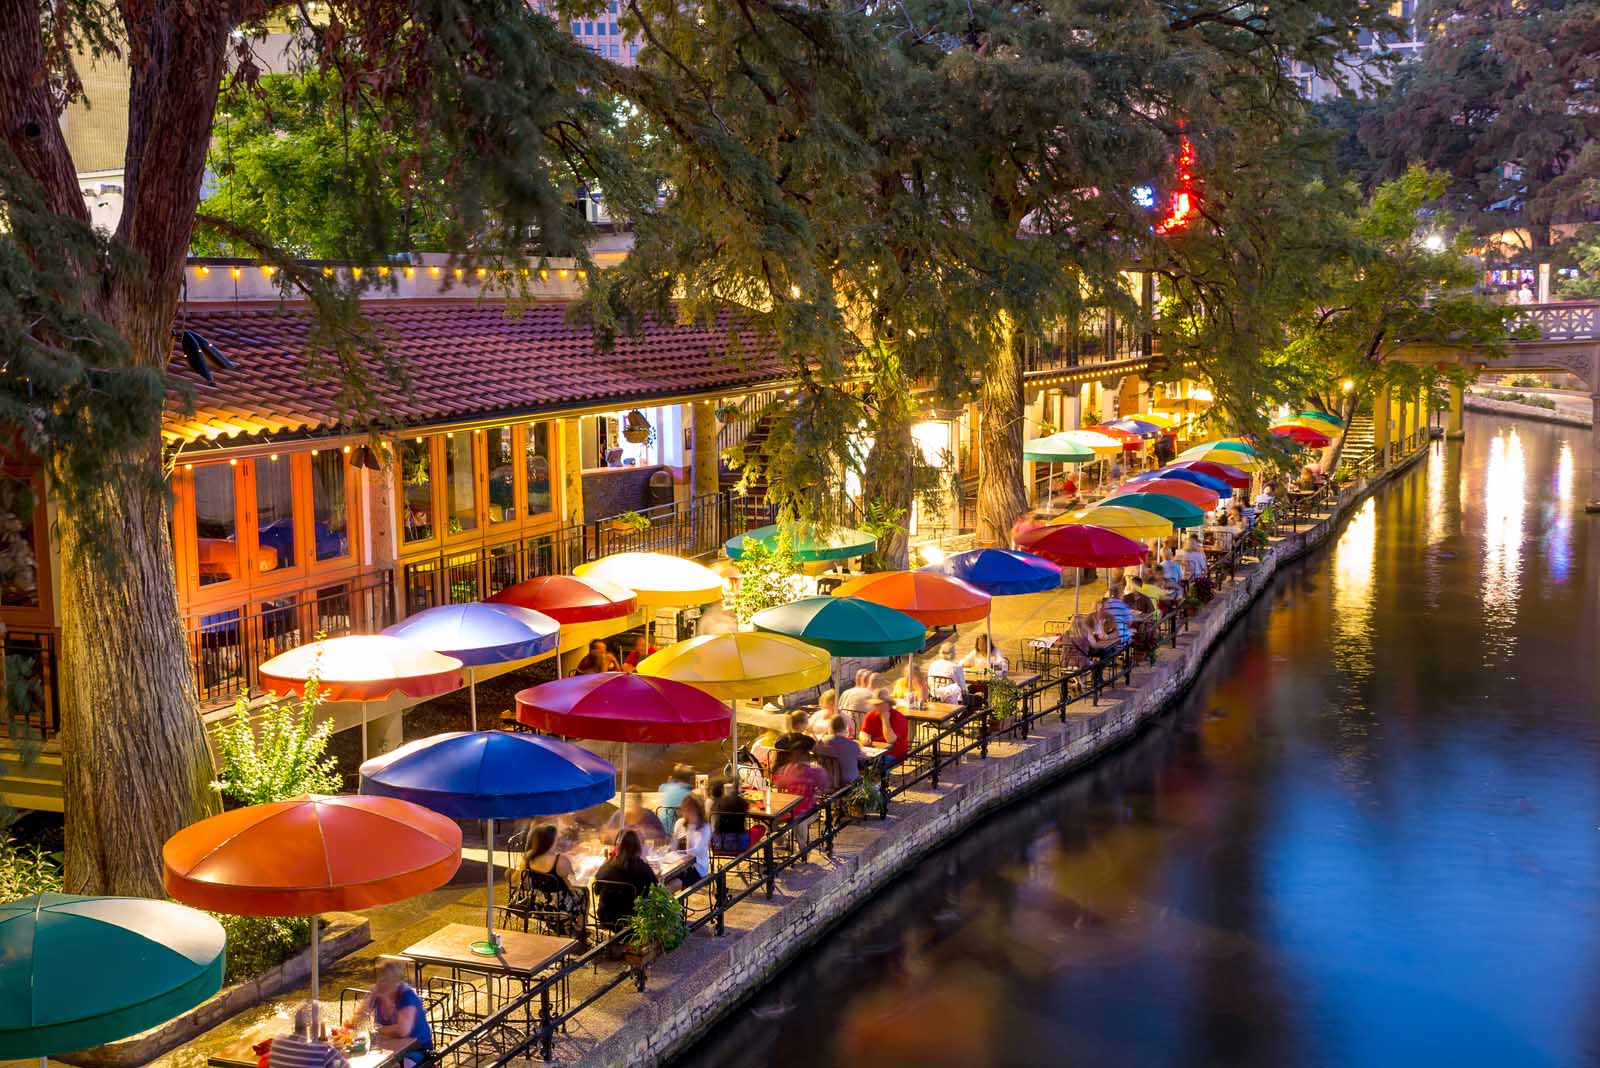 Things to do in San Antonio river Walk